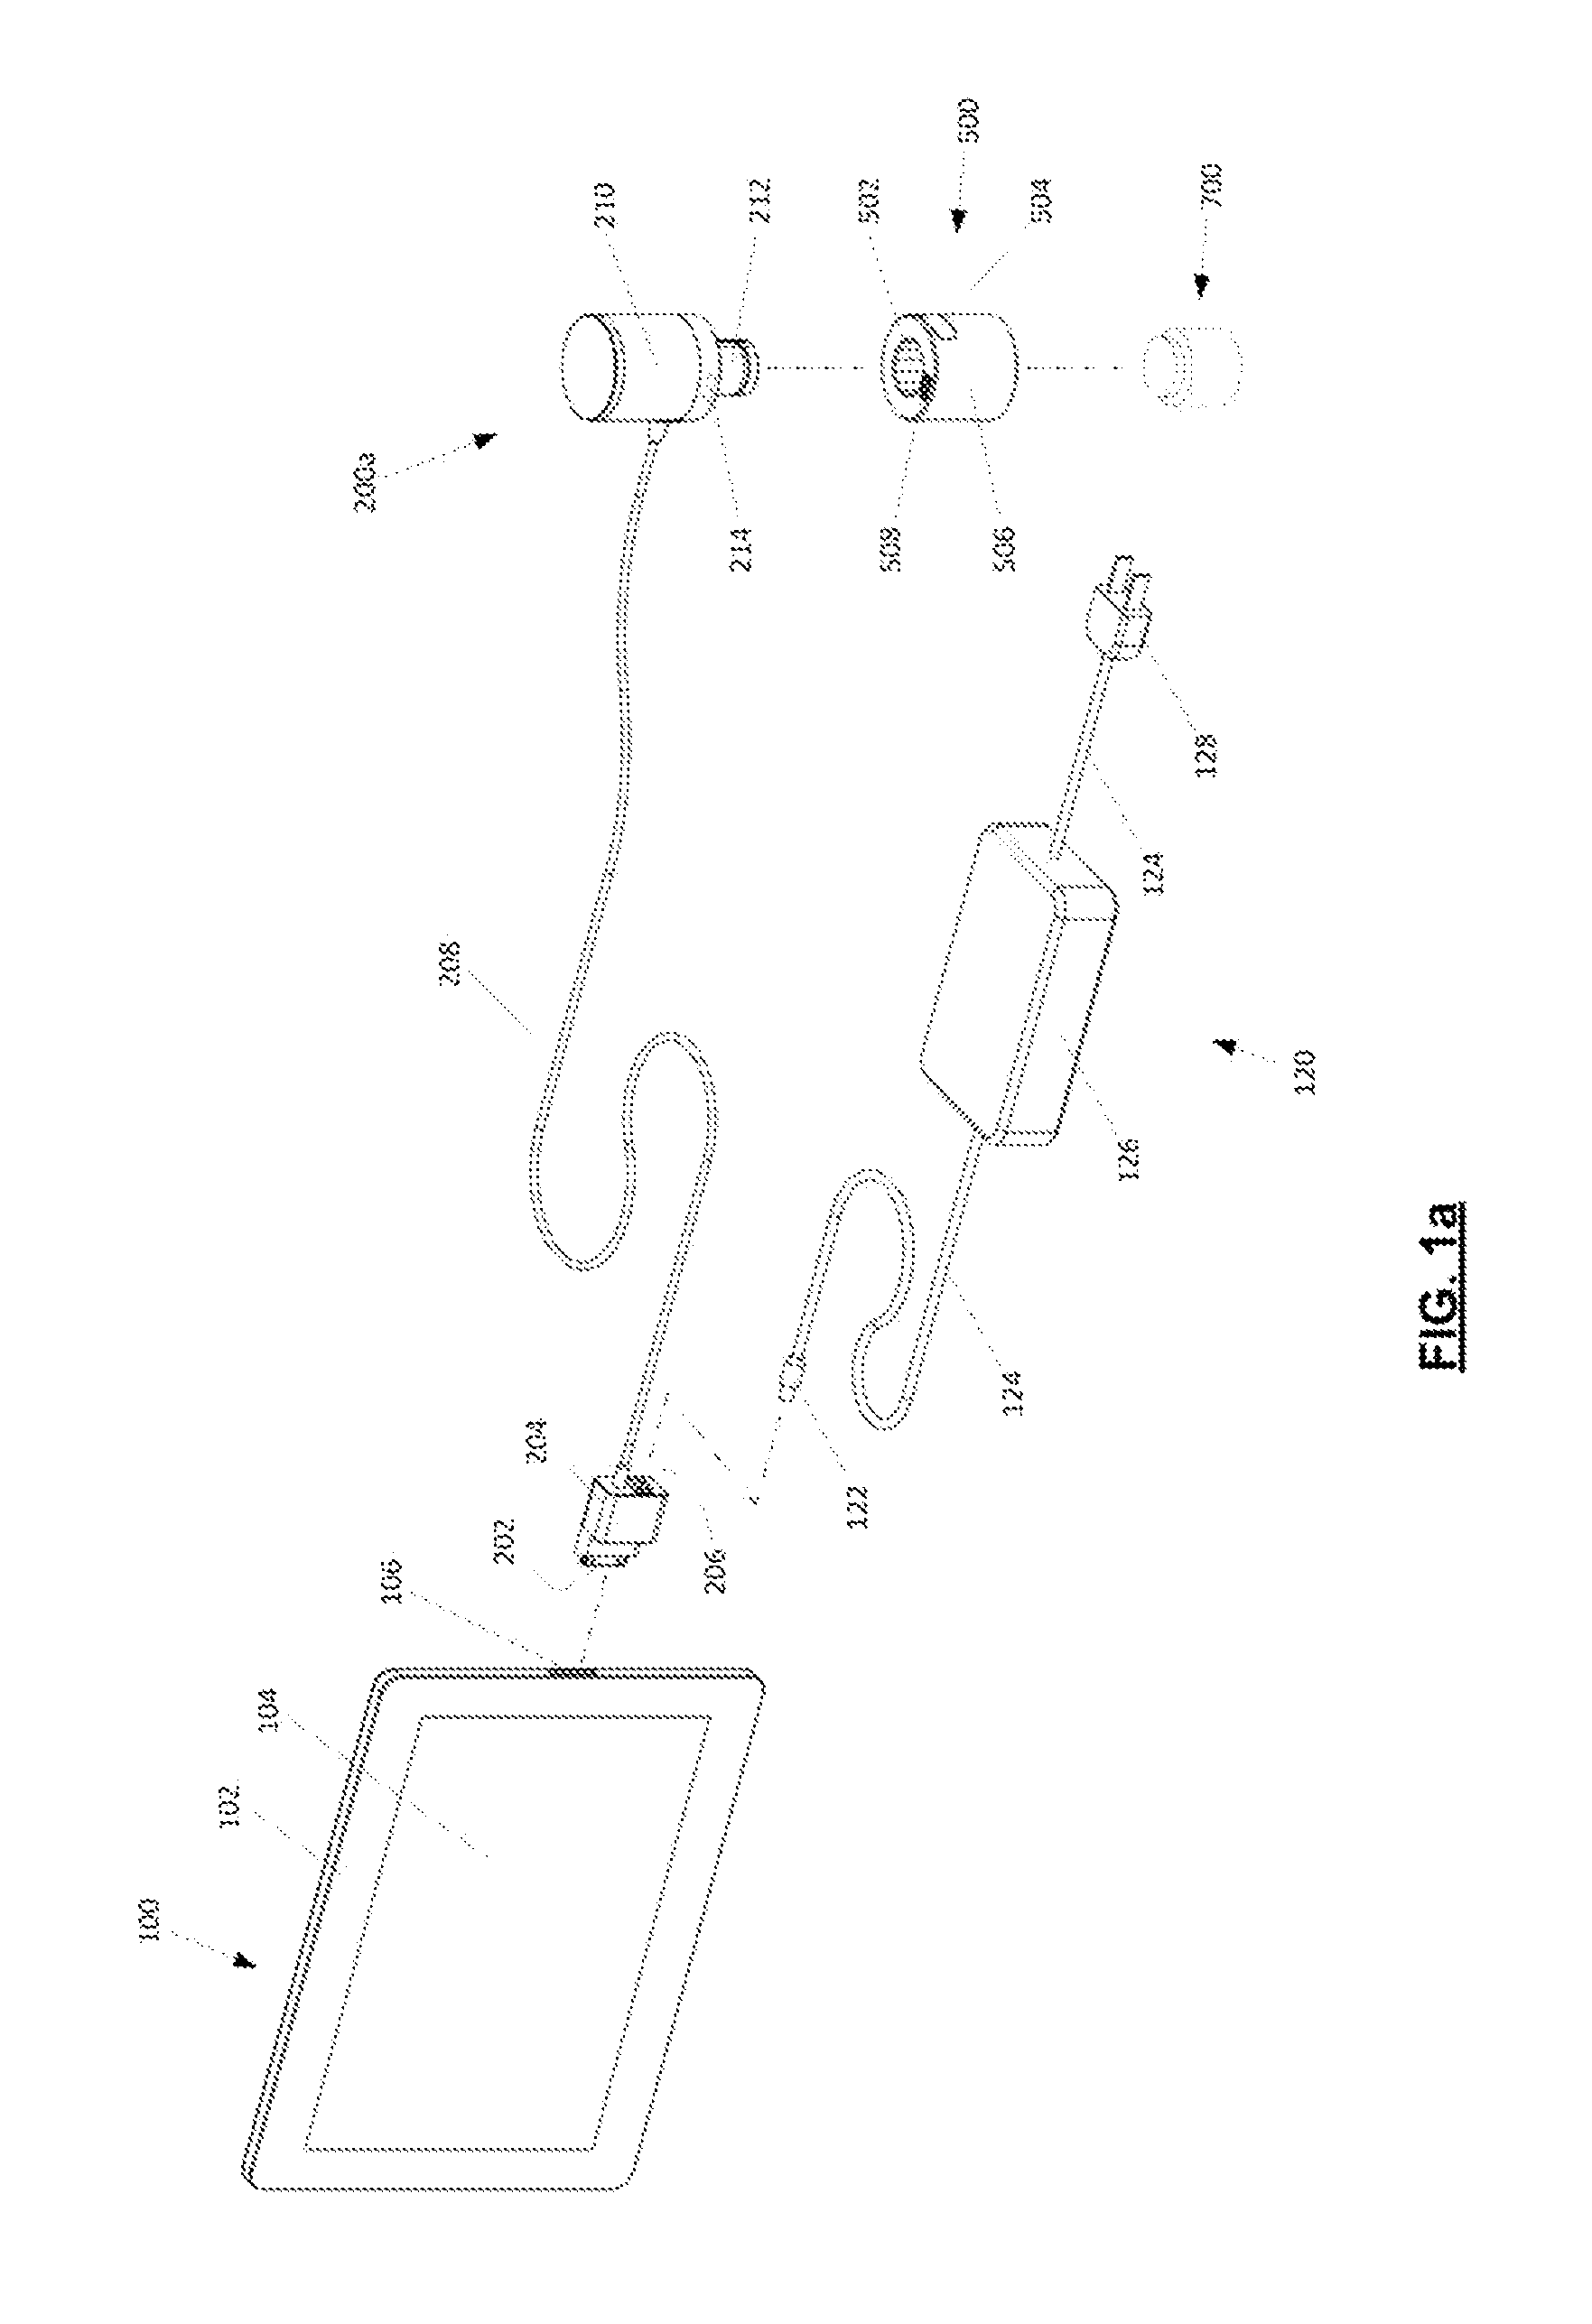 Modular peripheral digital camera system connectable to portable computing devices